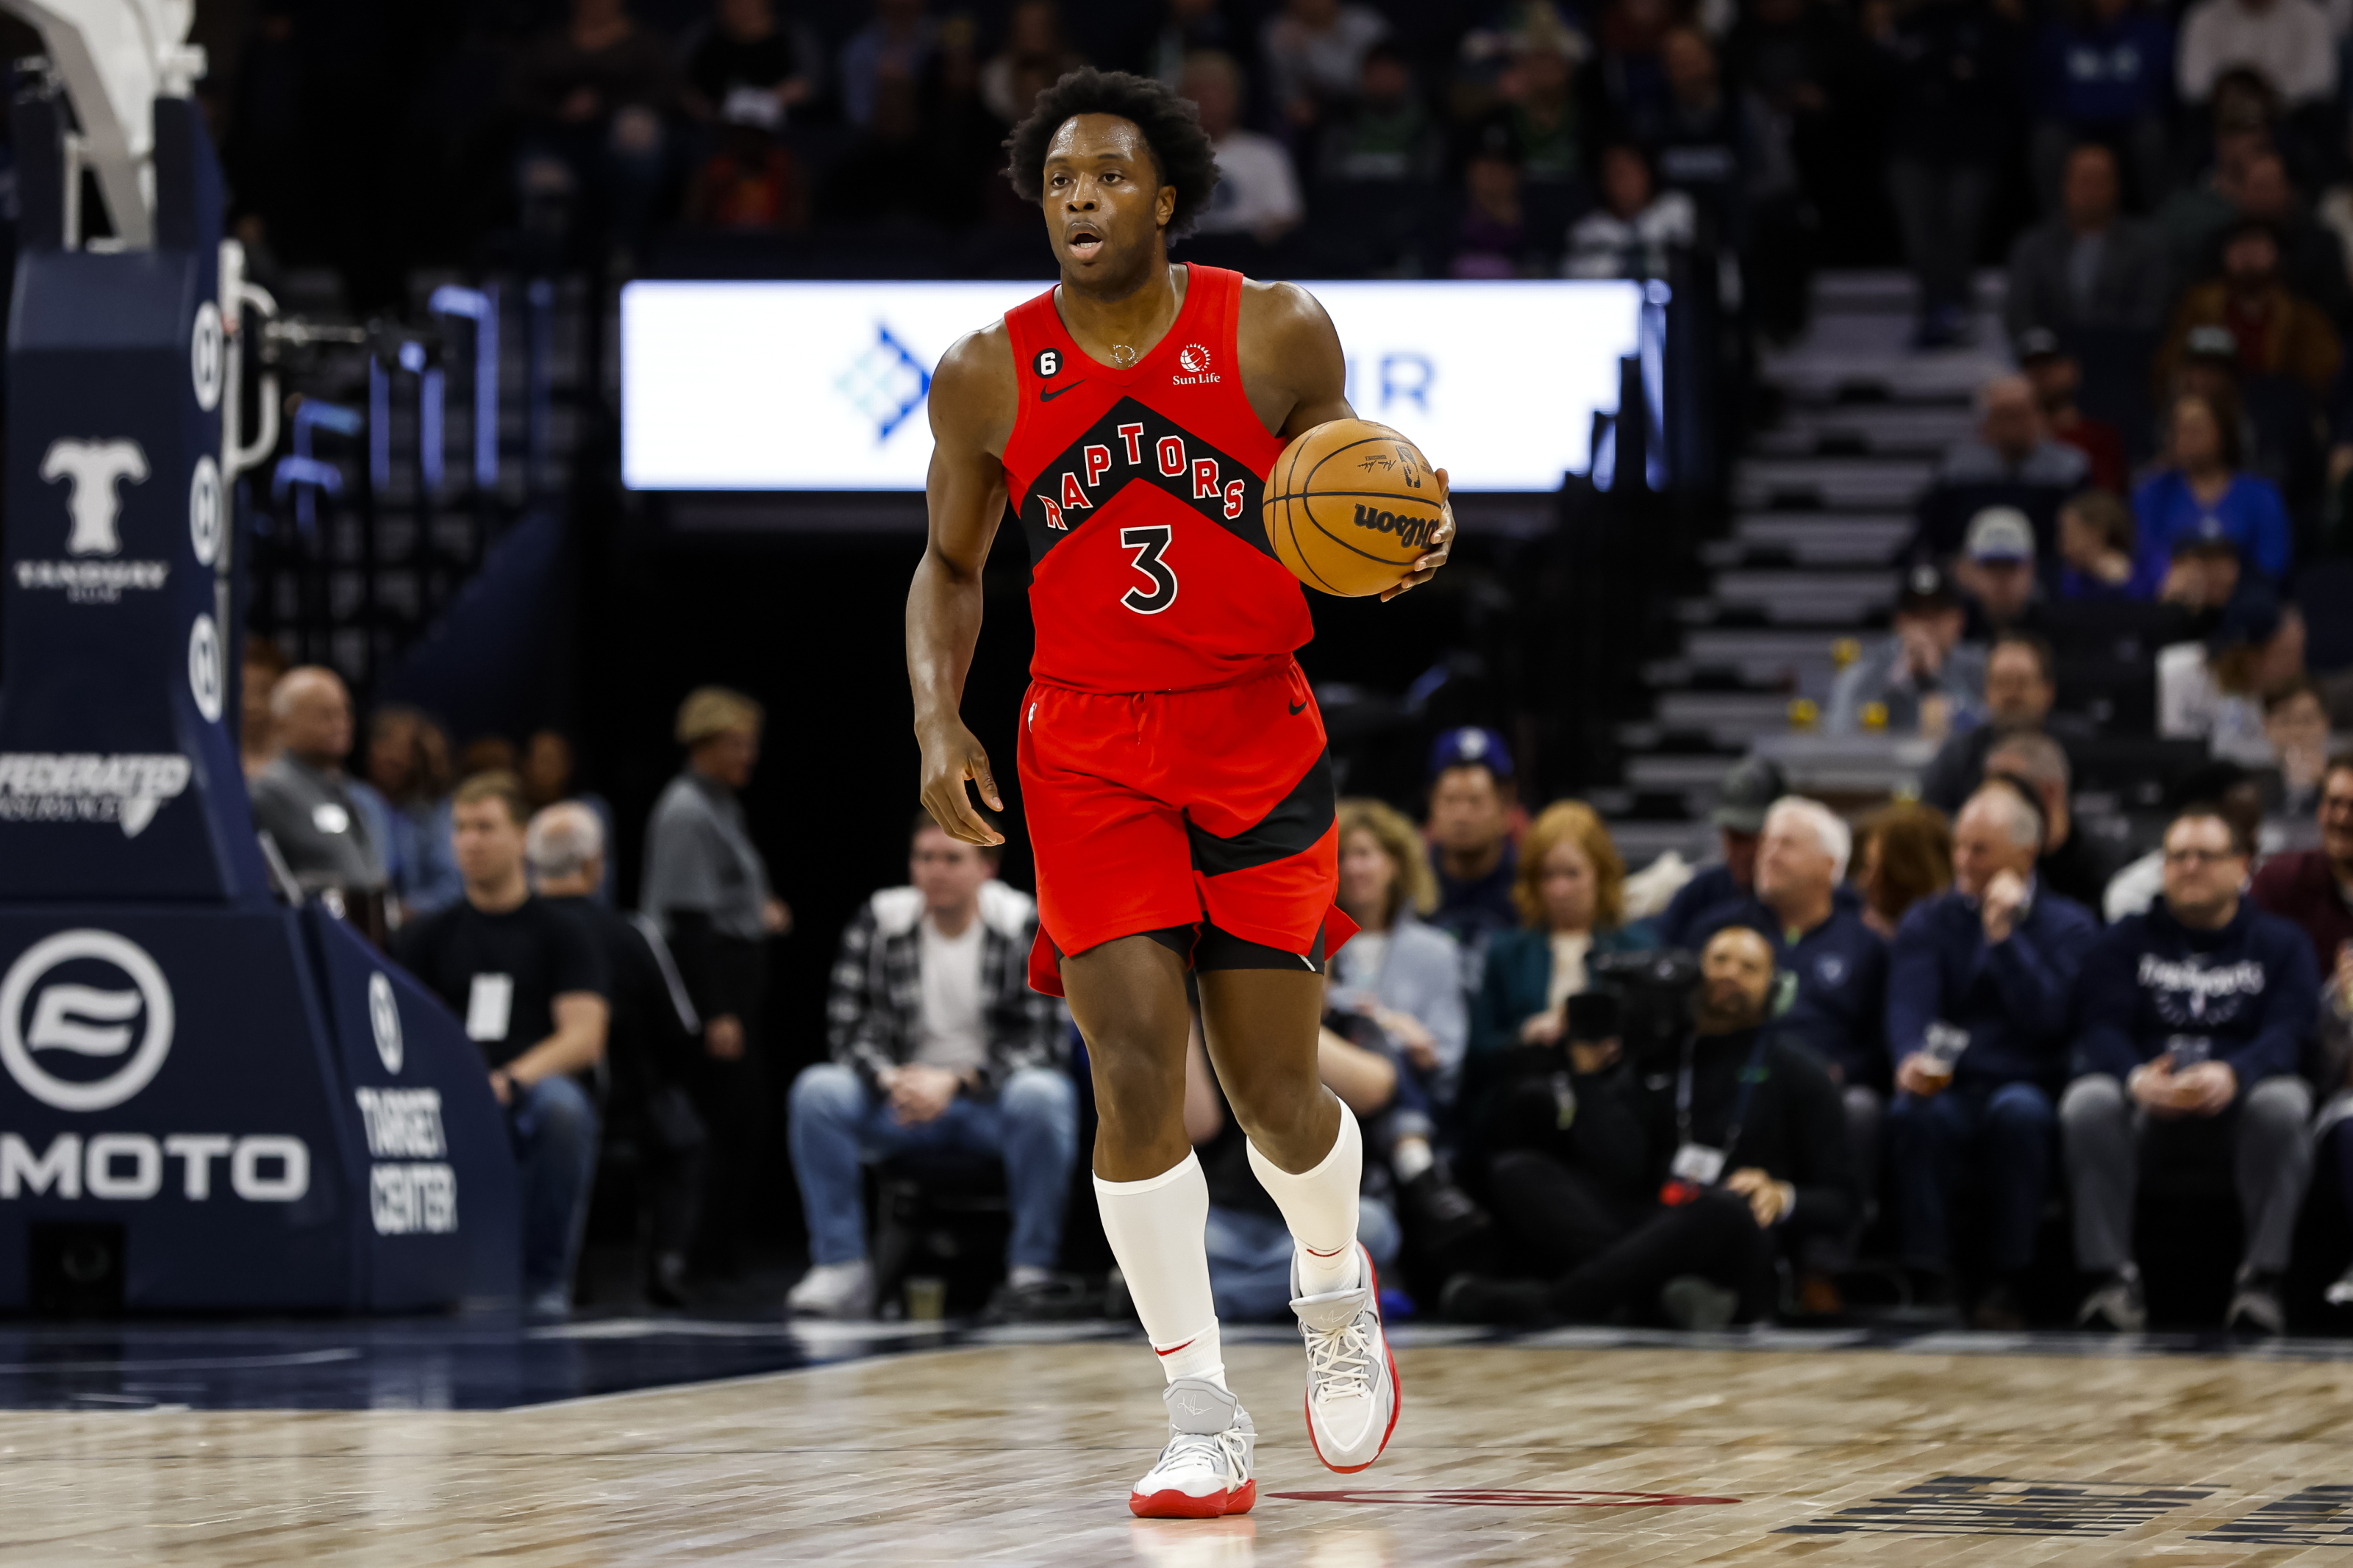 NBA rumors: Raptors' OG Anunoby targeted by hated rival in trade talks